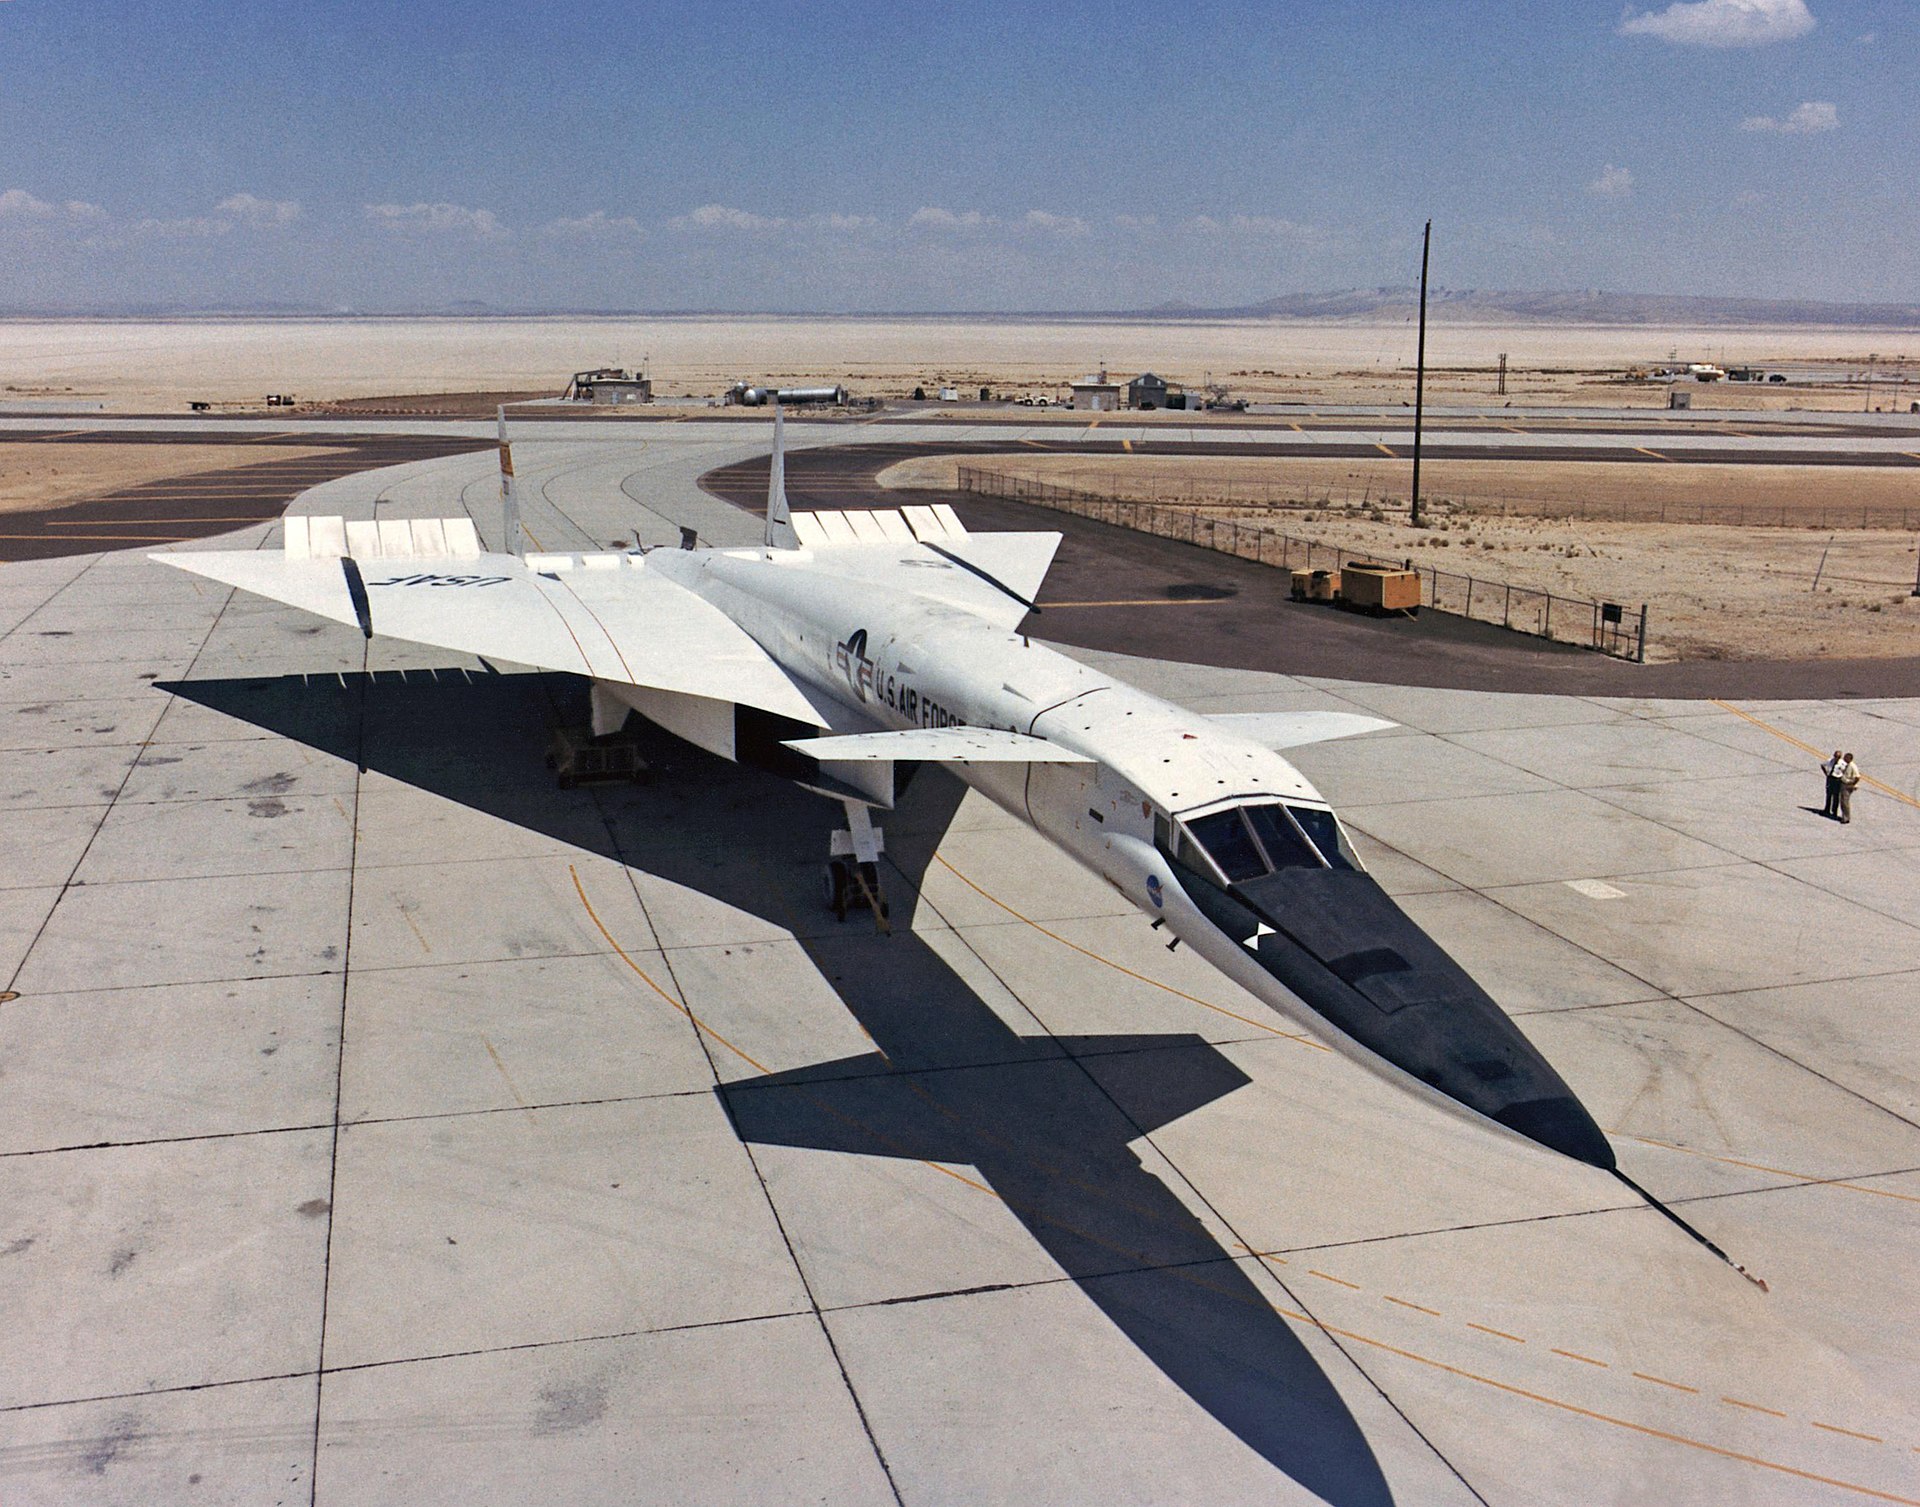 XB-70A parked at Edwards Air Force Base in 1967